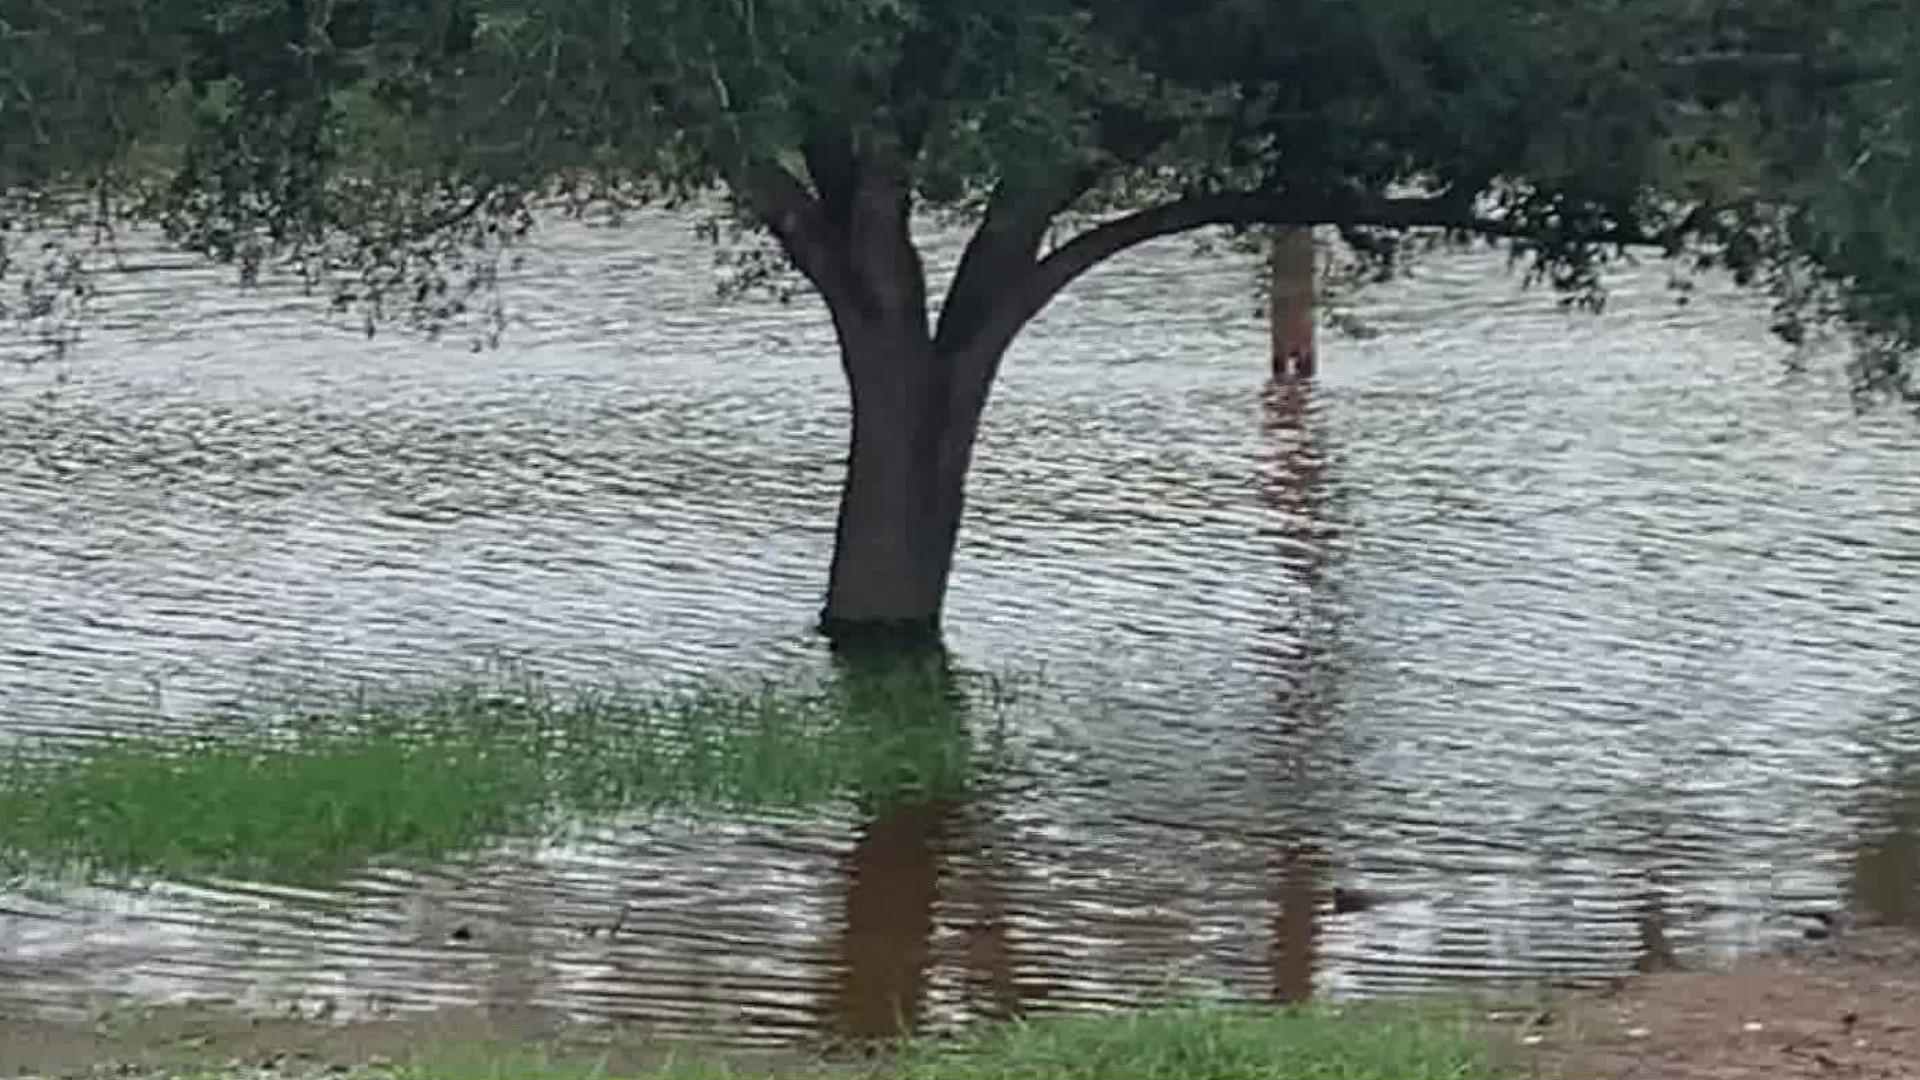 Local leaders remain cautiously optimistic that all of the rain runoff now flowing down the Nueces River will continue to impact the water source for our area.